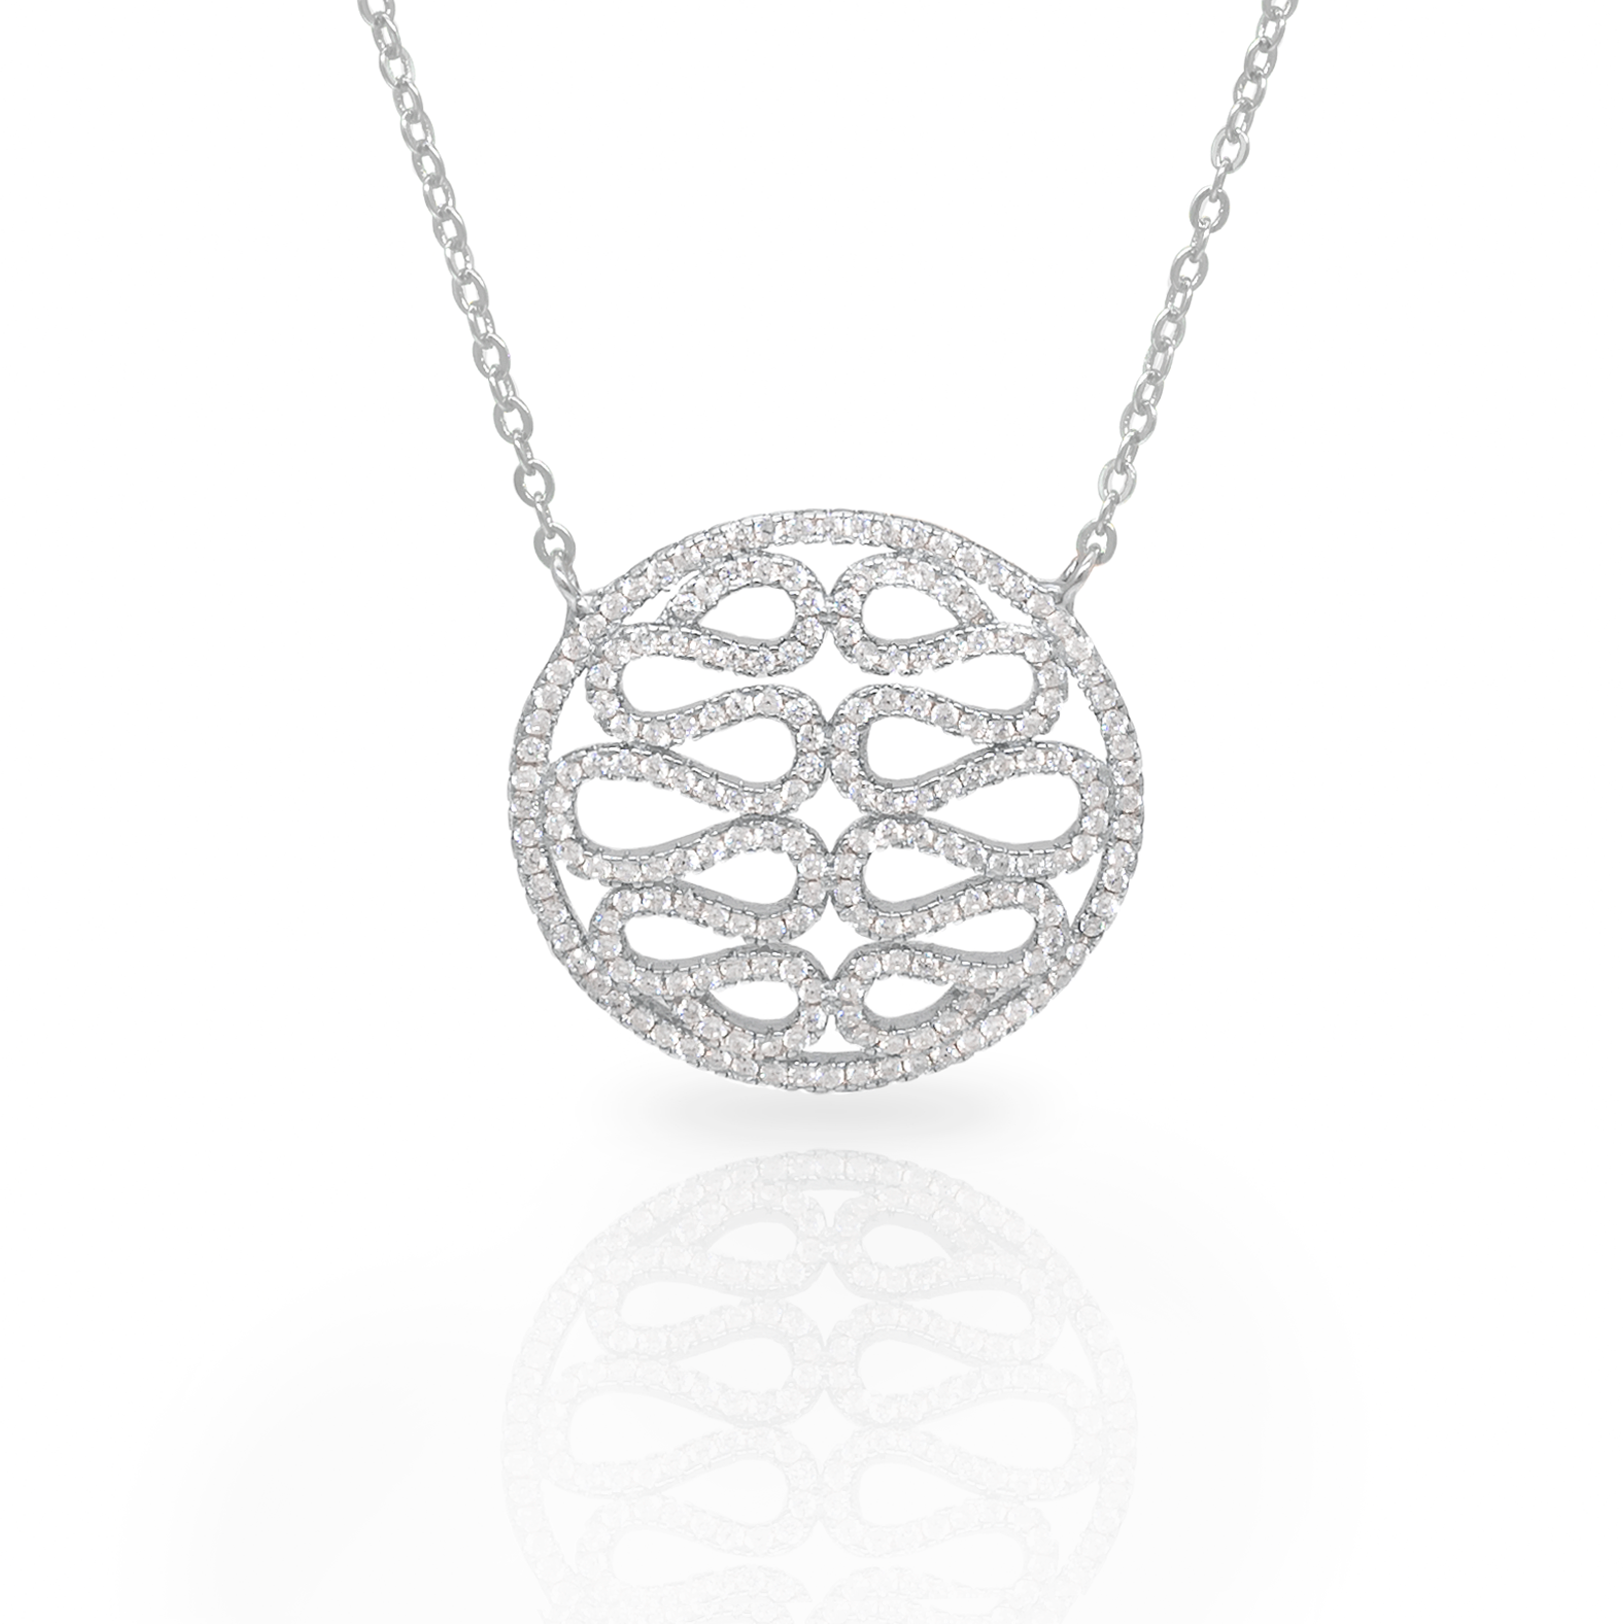 Round Necklace With Unique CZ Design in Sterling Silver